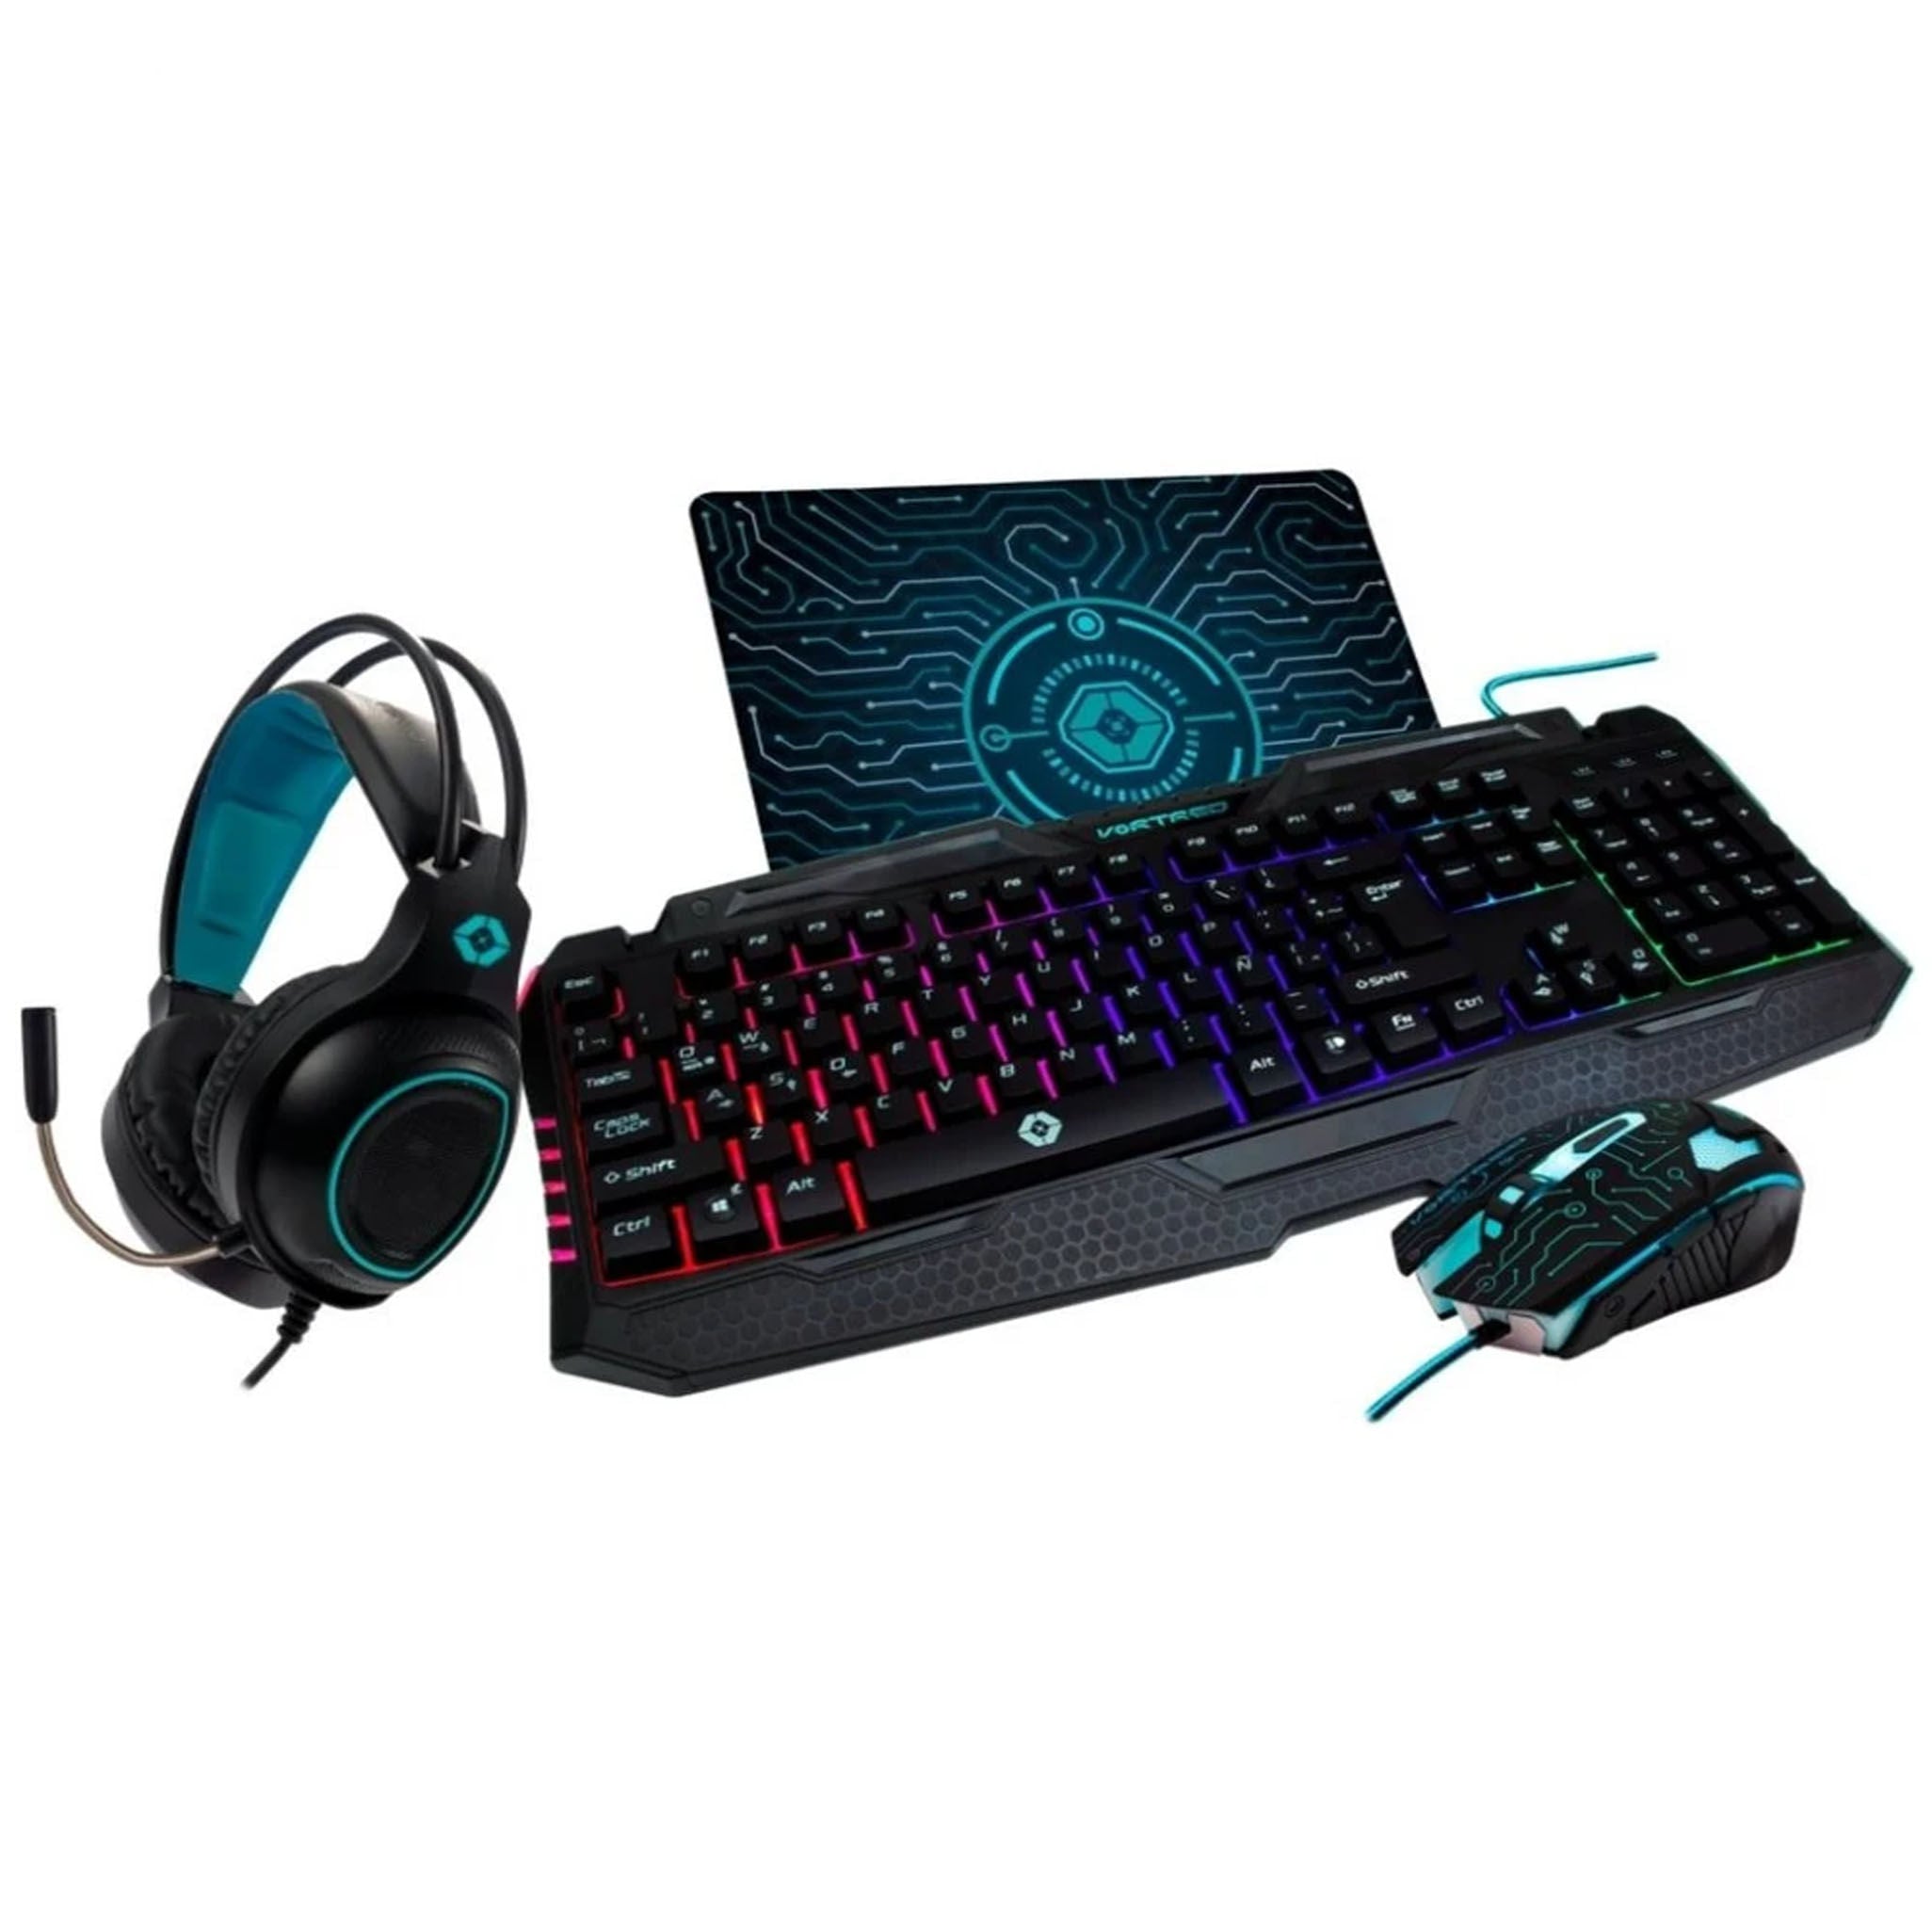 Teclado, Mouse, Tapete Y Diadema Gaming Vortred By Perfect Choice Luz Rgb Negro